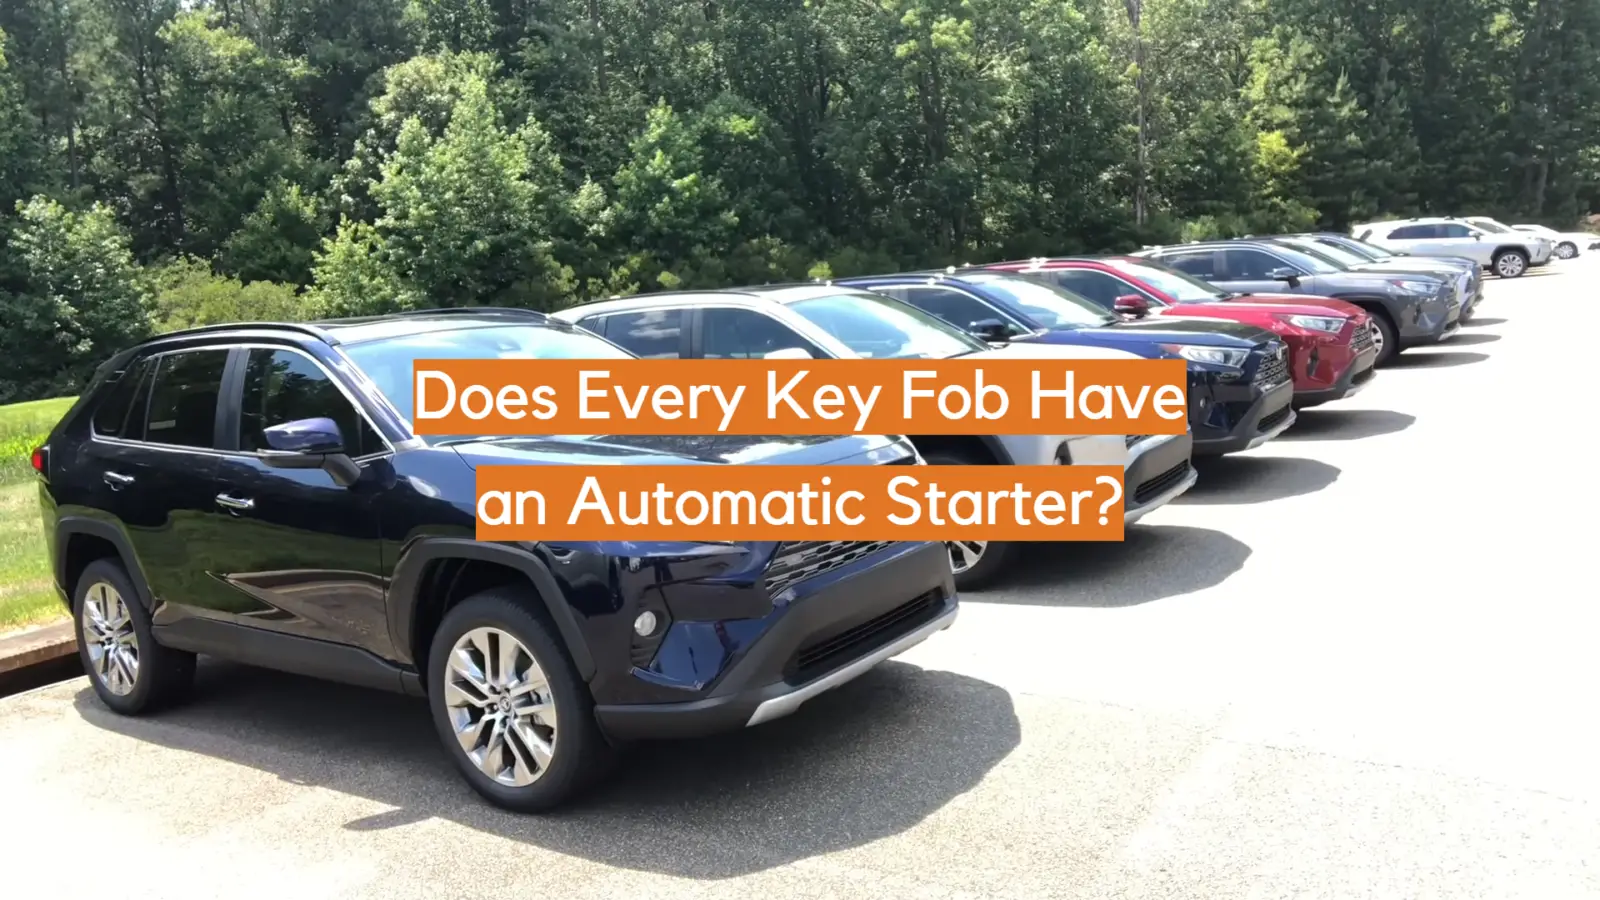 Does Every Key Fob Have an Automatic Starter?